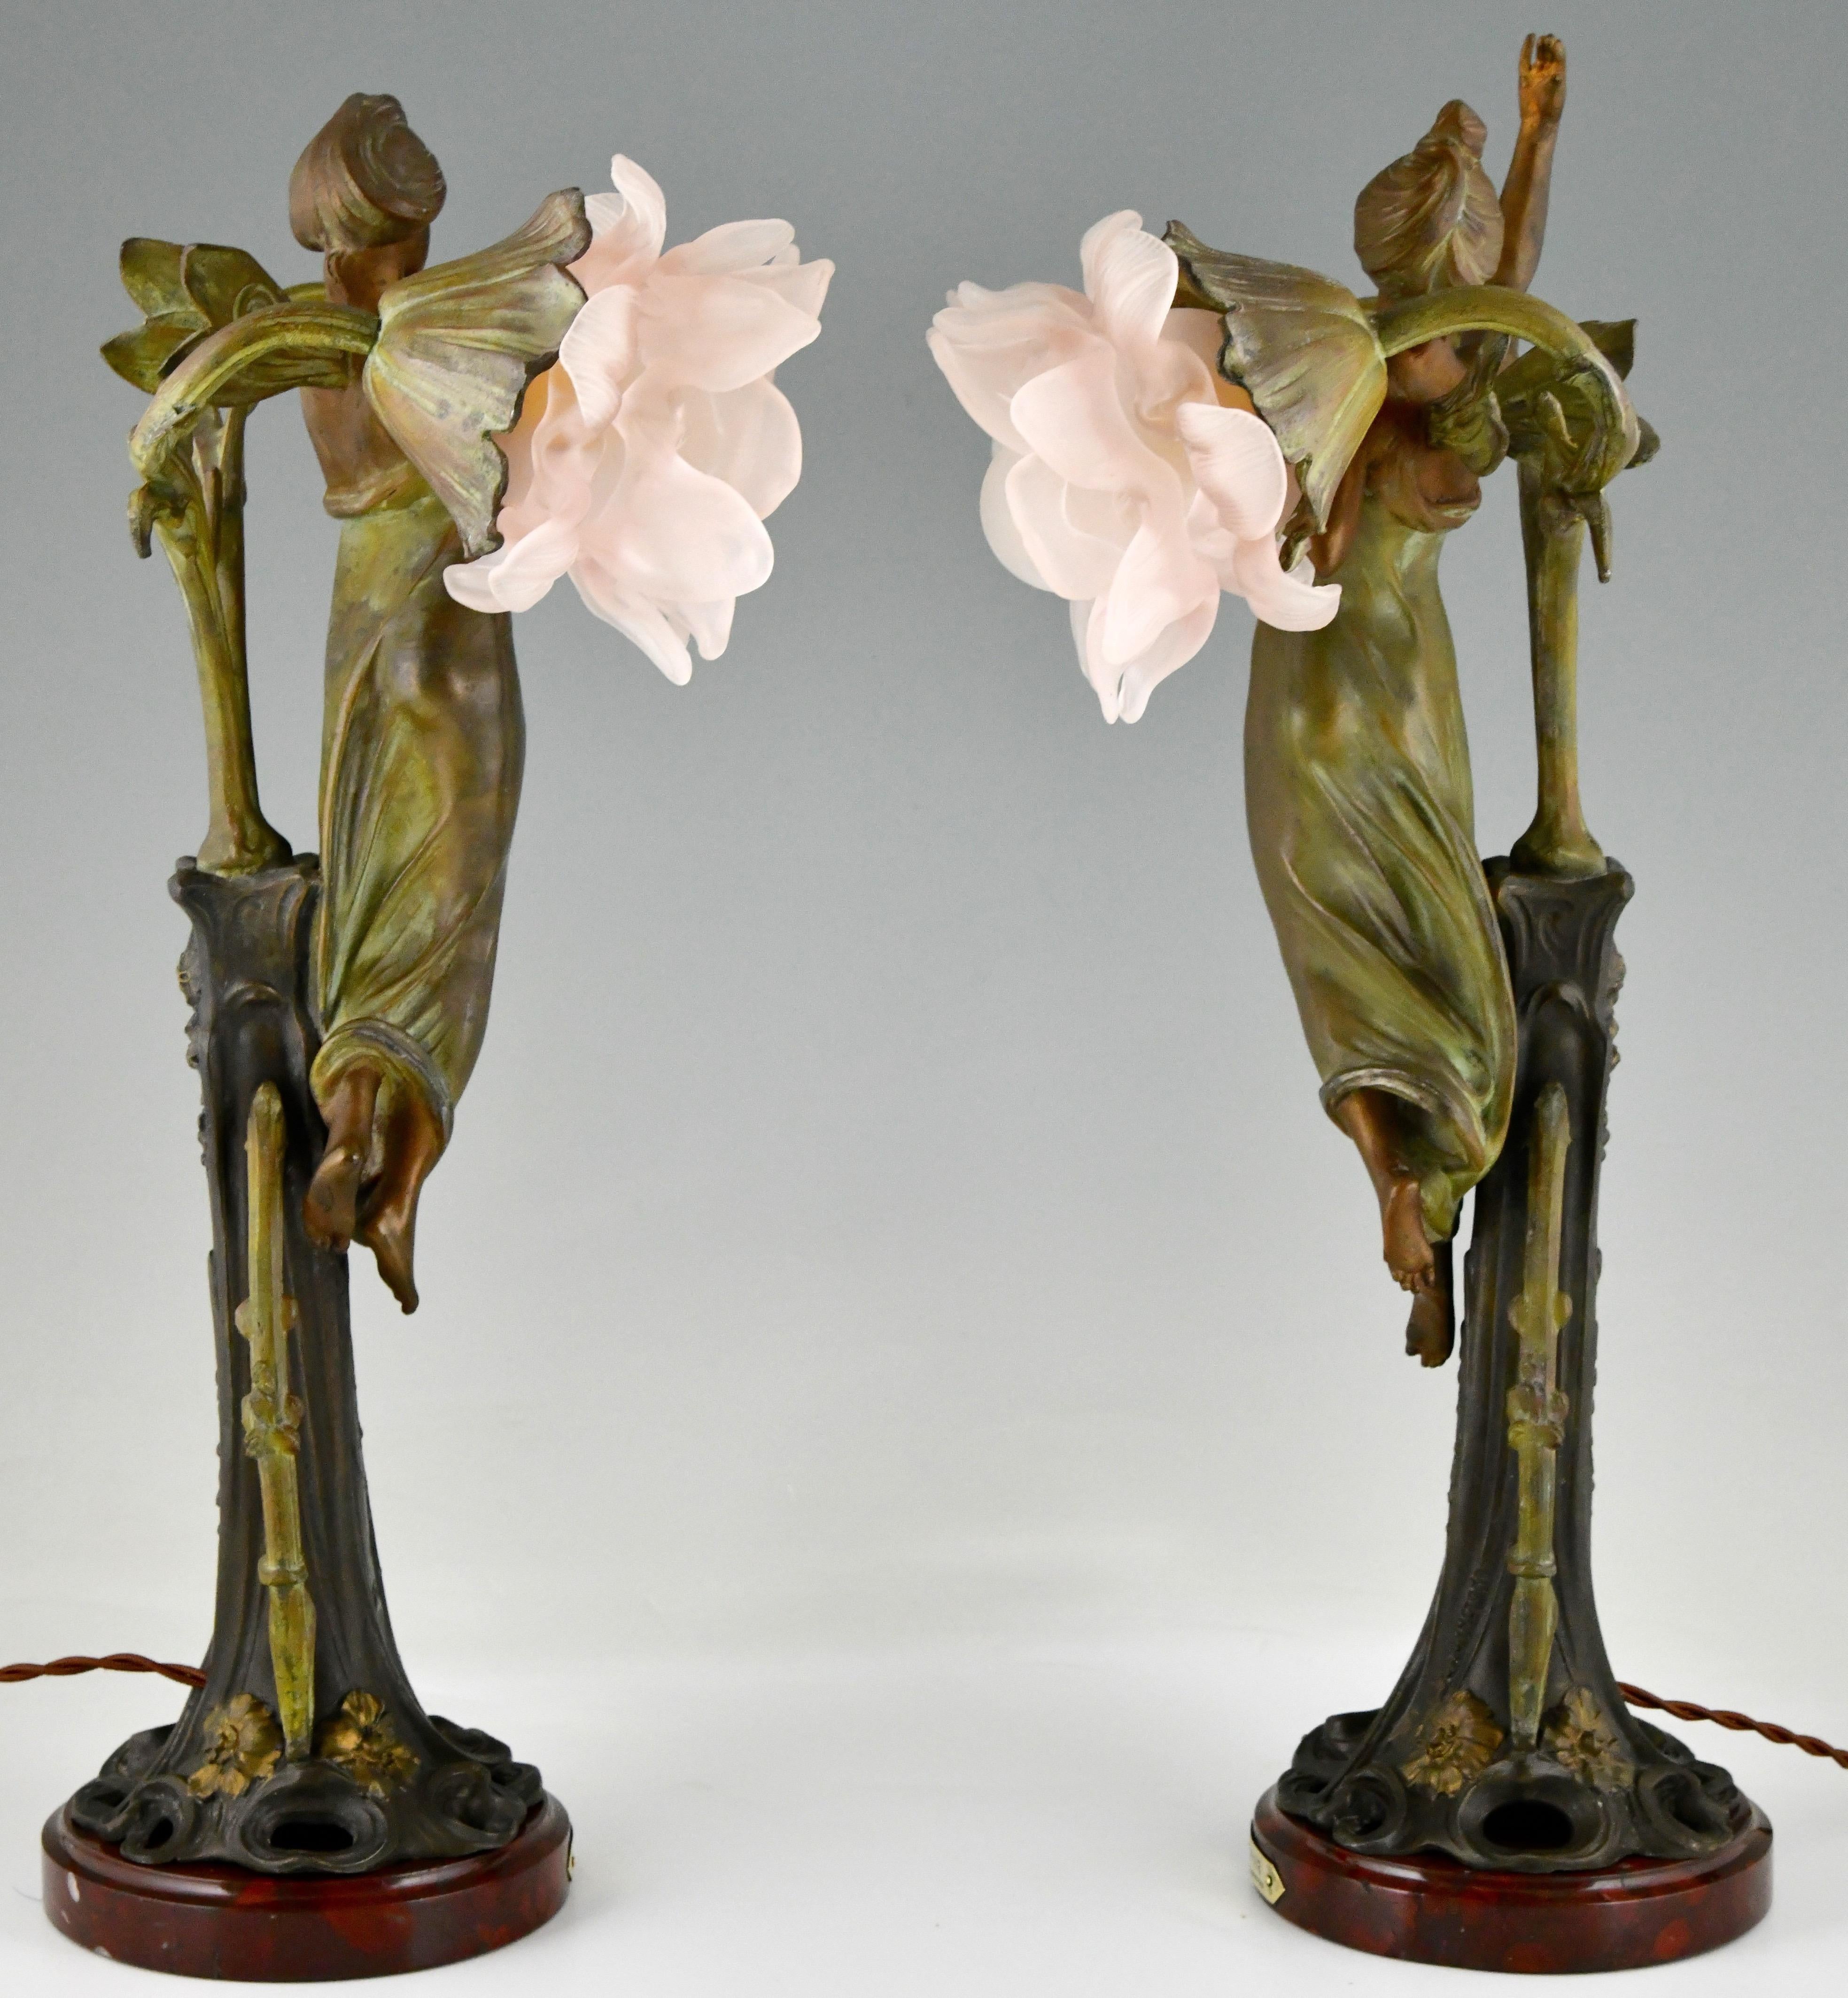 French Pair of Art Nouveau Lamps Ladies and Flowers by Bonnefond, France, 1900